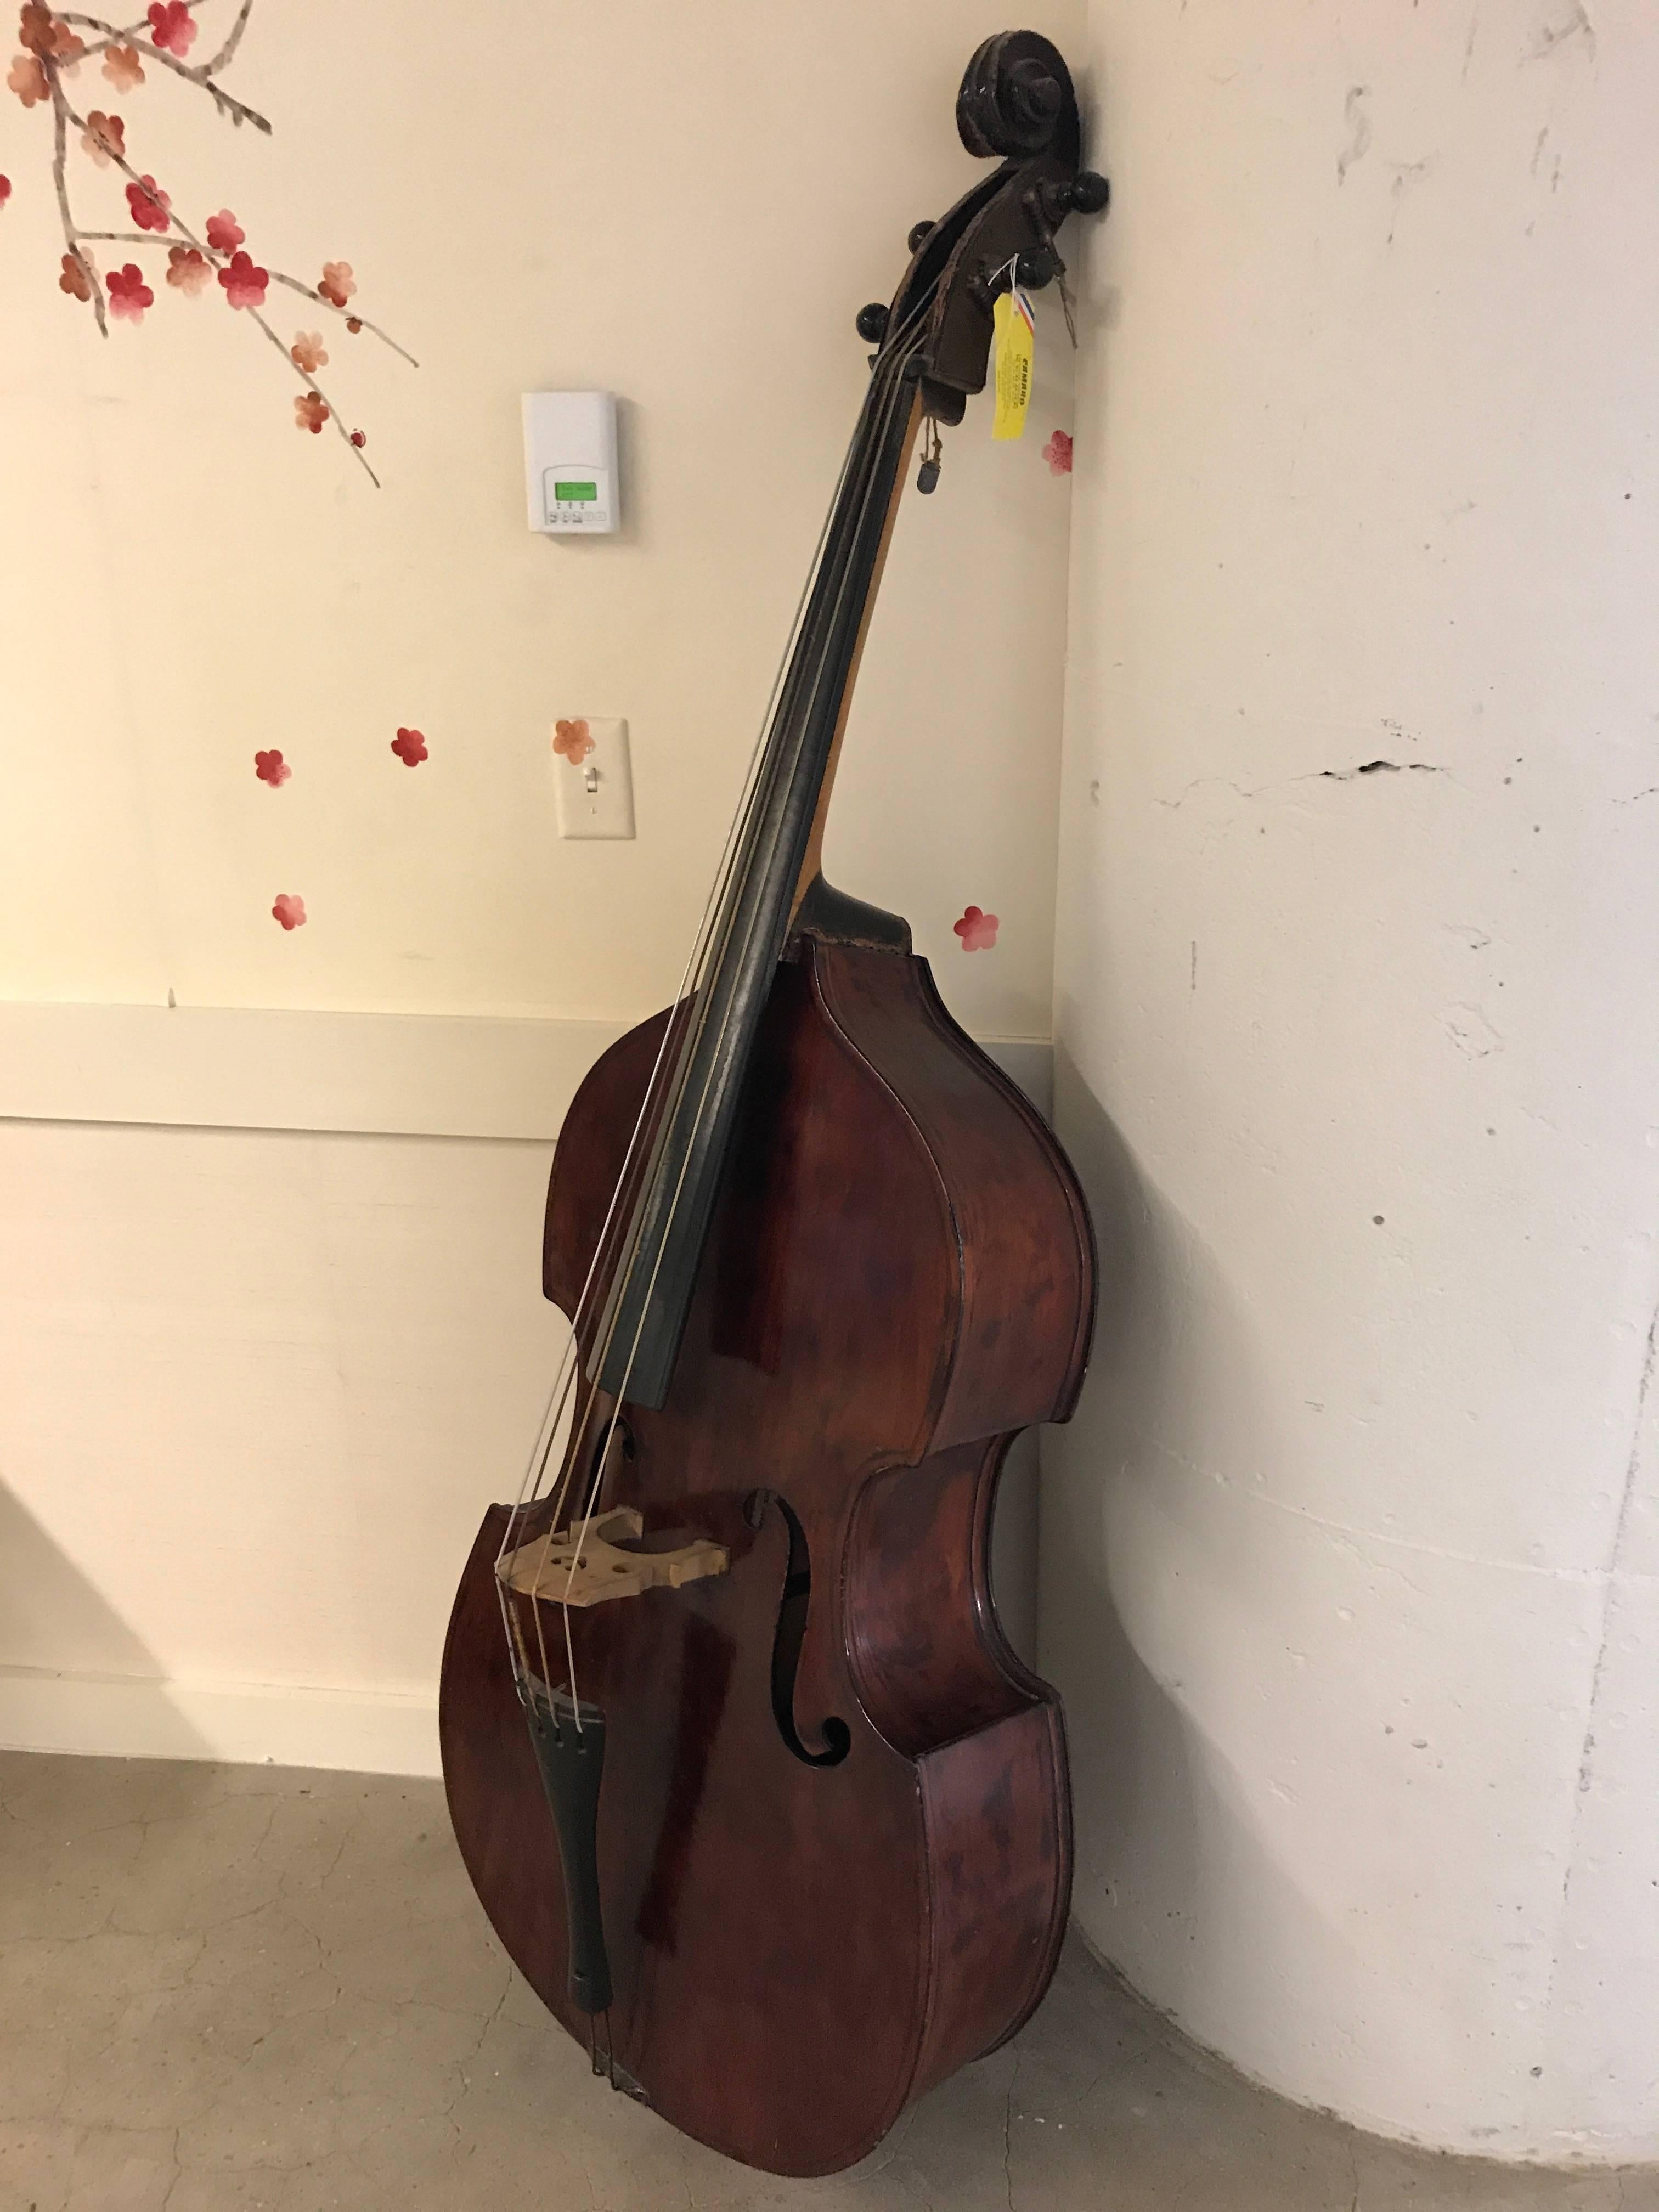 Early 20th century mahogany double bass. Inside label reads "Made in Czechoslovakia".